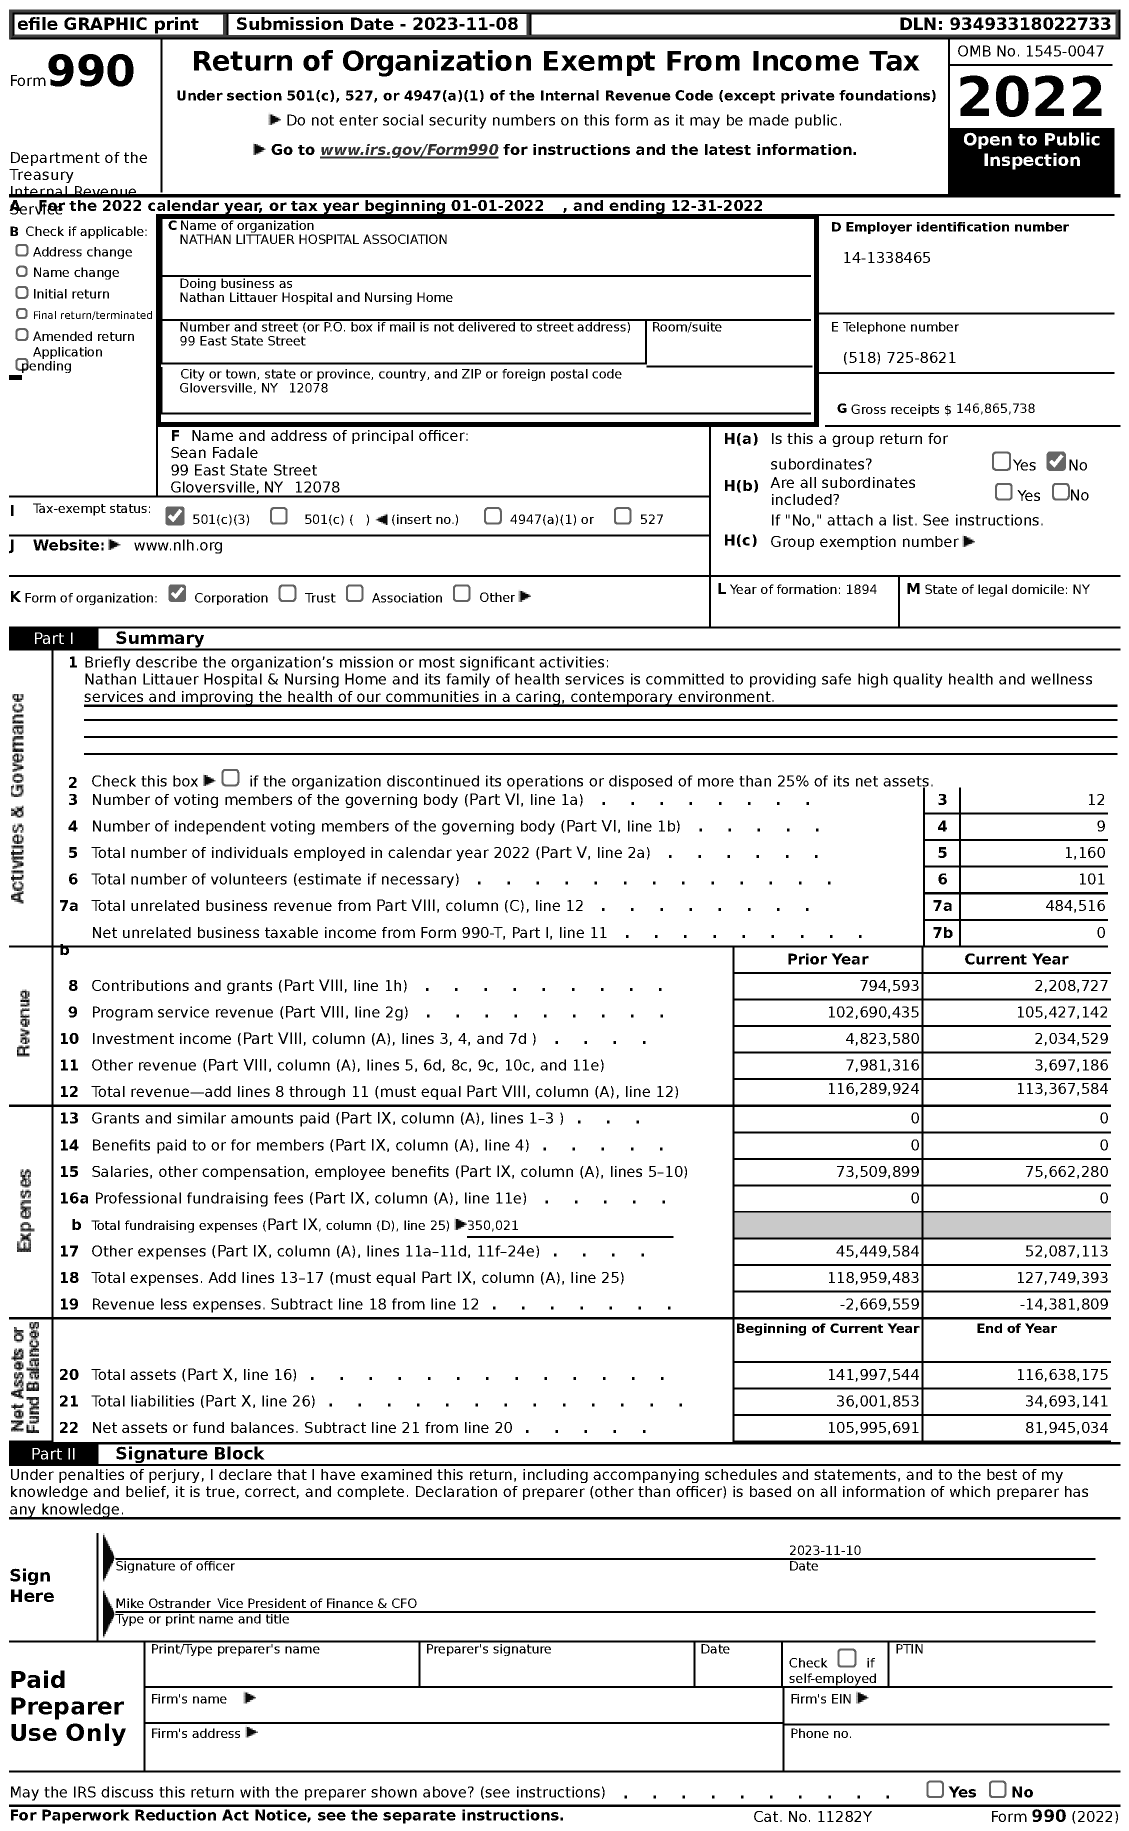 Image of first page of 2022 Form 990 for Nathan Littauer Hospital and Nursing Home (NLH)